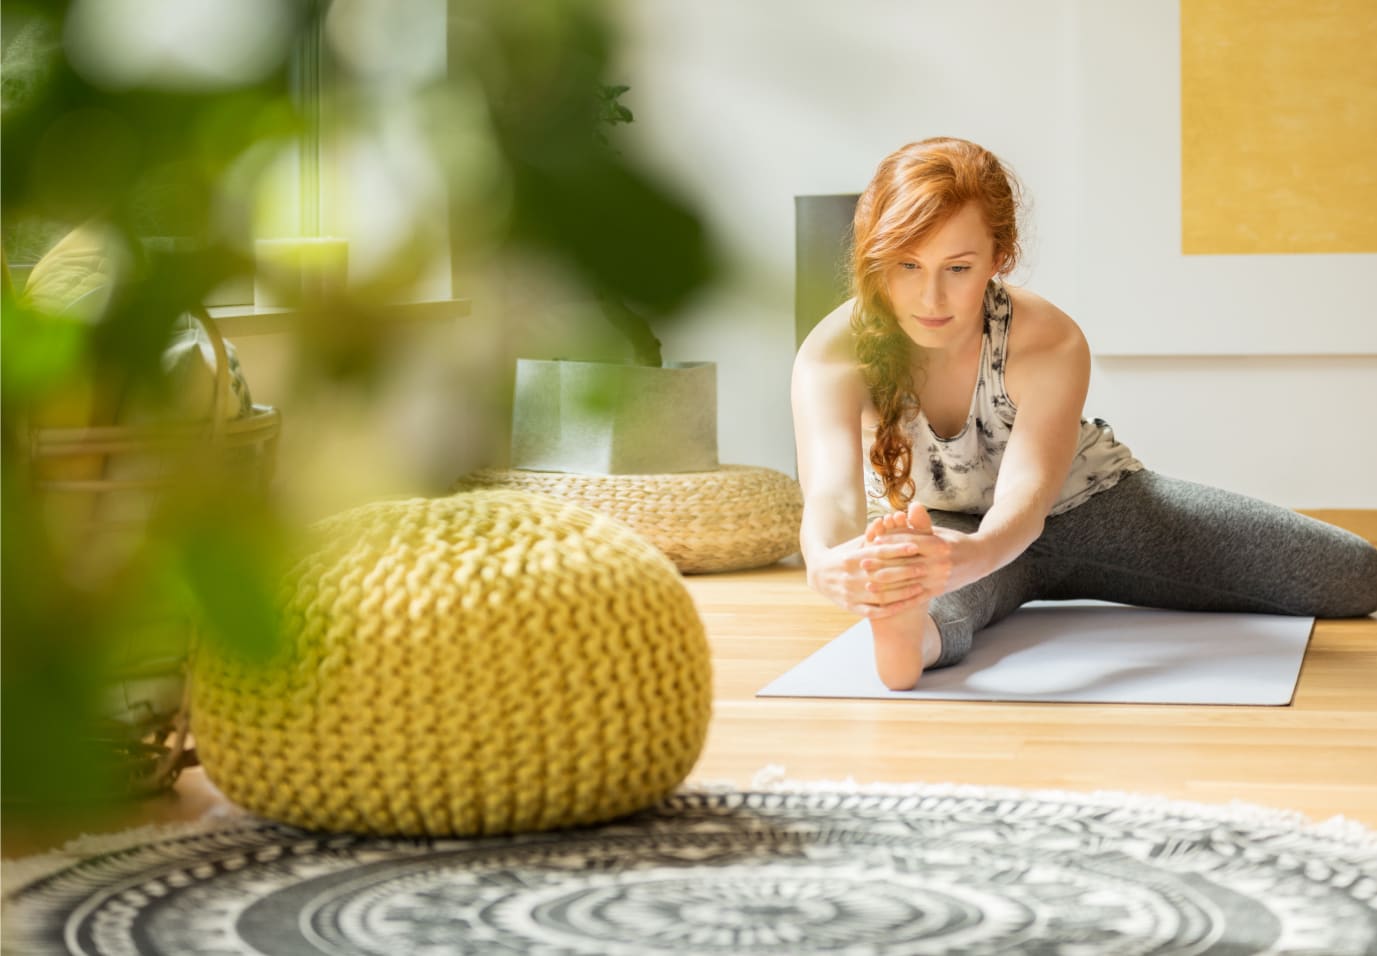 Active caucasian woman exercising on the floor at her home with yellow decor.